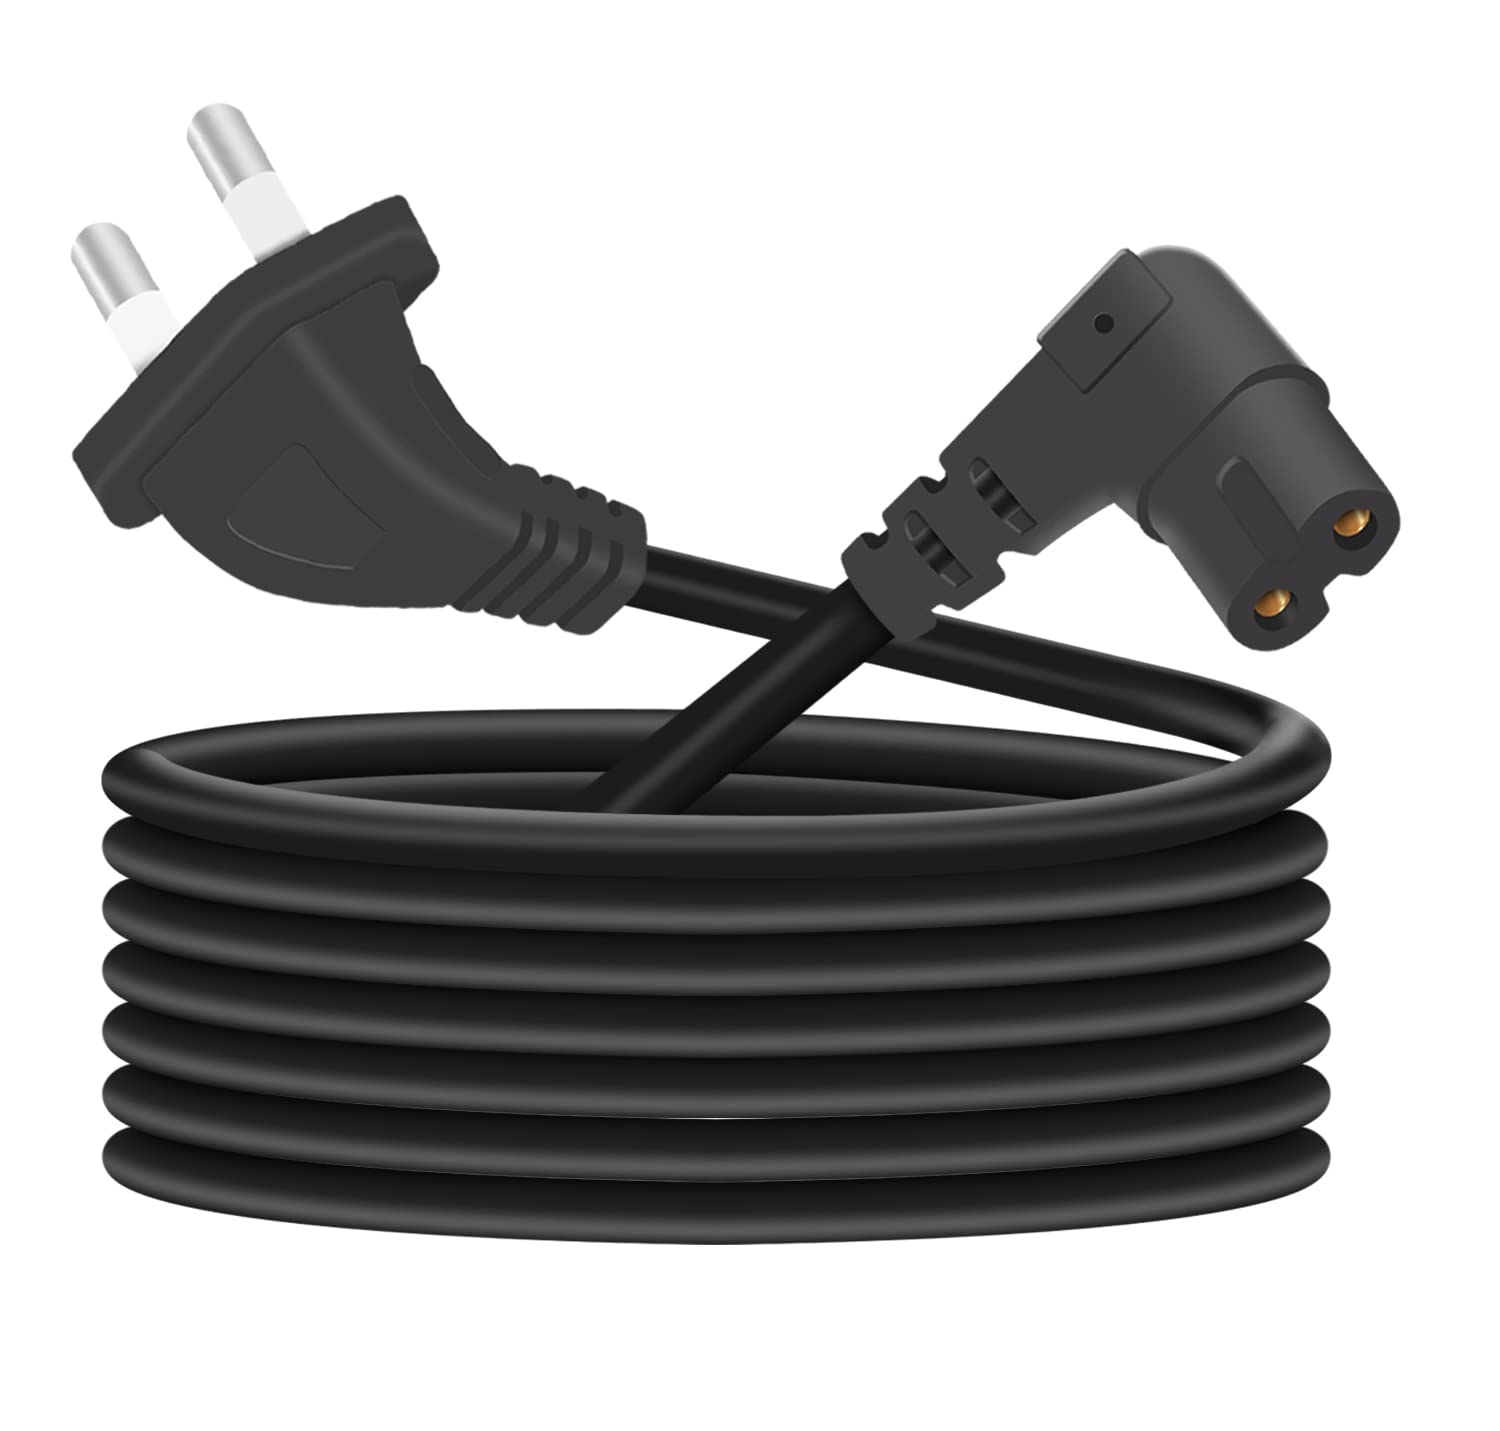 FEDUS 3 Meter 2-pin L-Shape Replacement AC Power Cable for LED TV, Play Station, Laptop, PC, Notebook, Tape Recorder